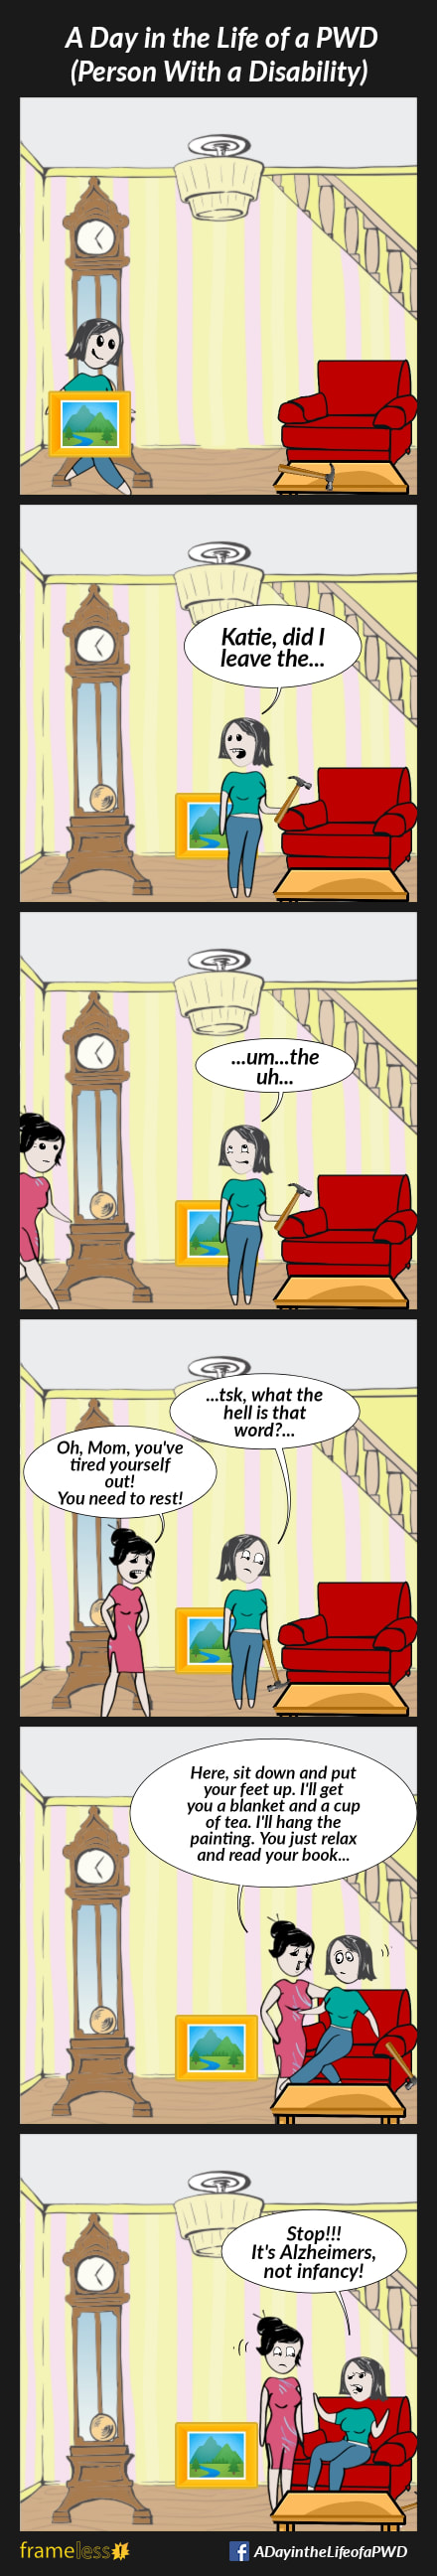 COMIC STRIP 
A Day in the Life of a PWD (Person With a Disability) 

Frame 1:
A woman is carrying a framed painting into a room in her home.

Frame 2:
Picking up a hammer from the coffee table, she calls over her shoulder, 